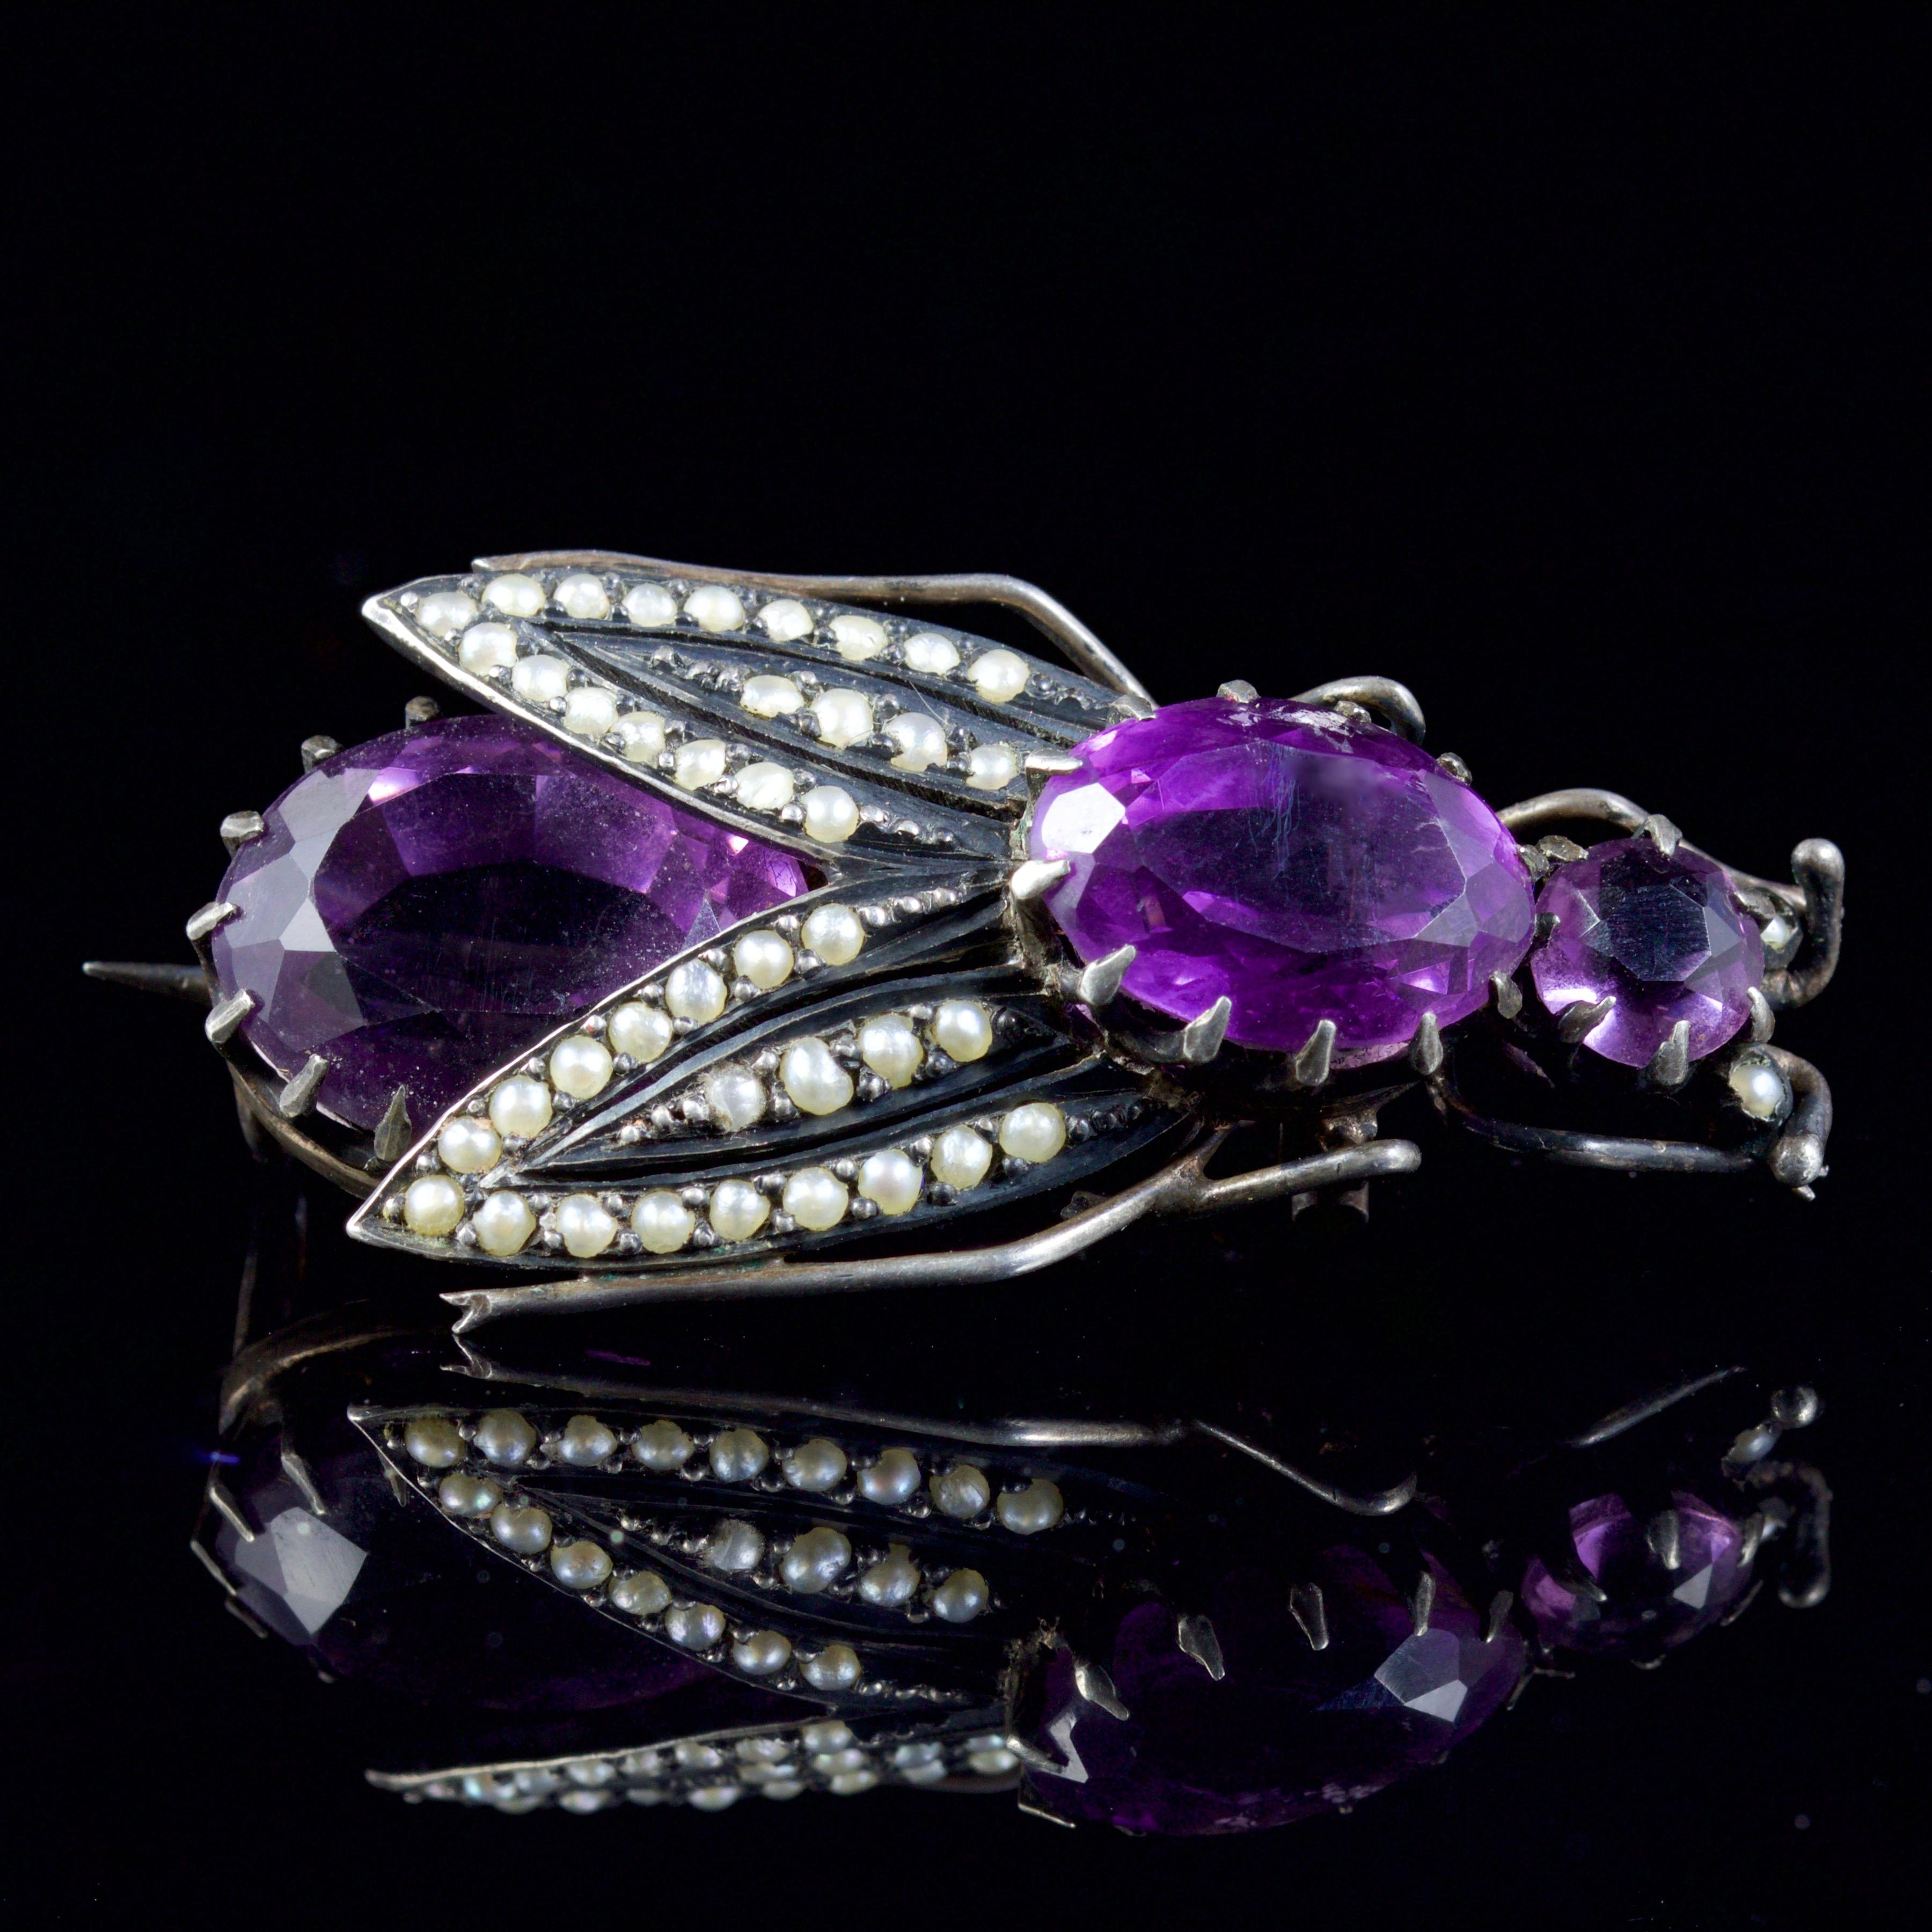 This wonderful Victorian Amethyst bug brooch is set in Silver, circa 1880.

The brooch is handmade, and is decorated in over 10ct of natural Amethyst’s.

The bug has 2 Pearls set as his eyes leading to an Amethyst head, an Amethyst body and Pearls